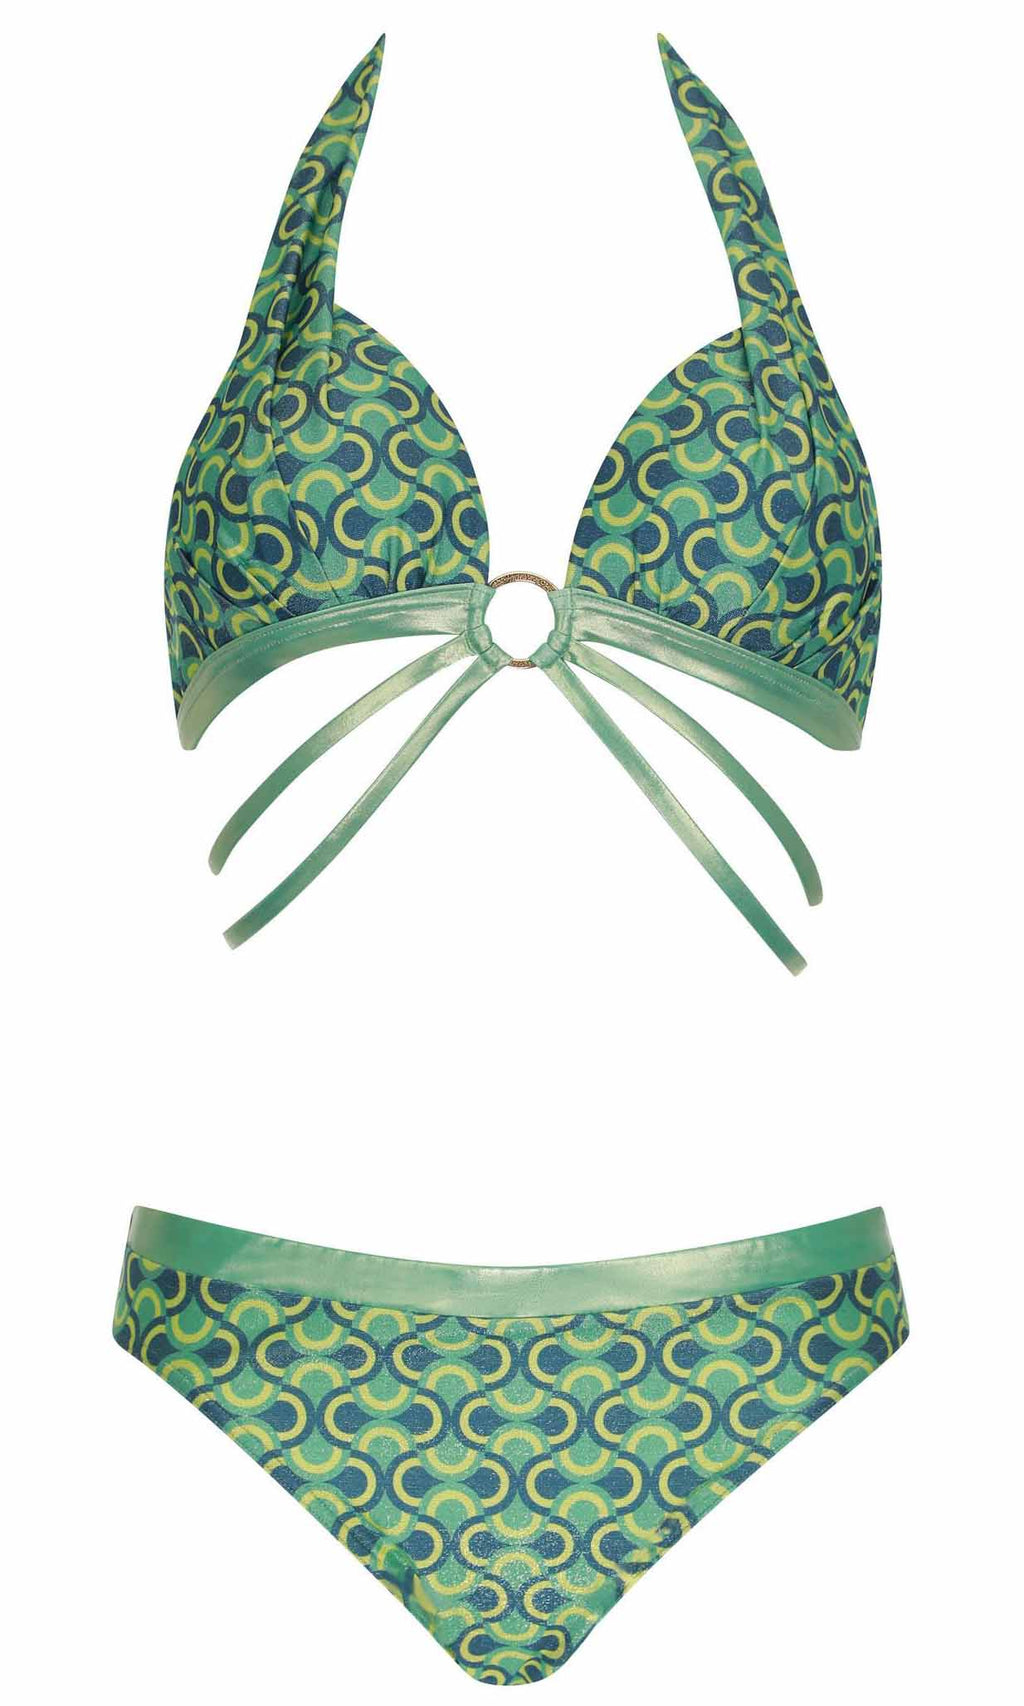 Bikini Set Limelicious. Special Order A Cup to D Cup